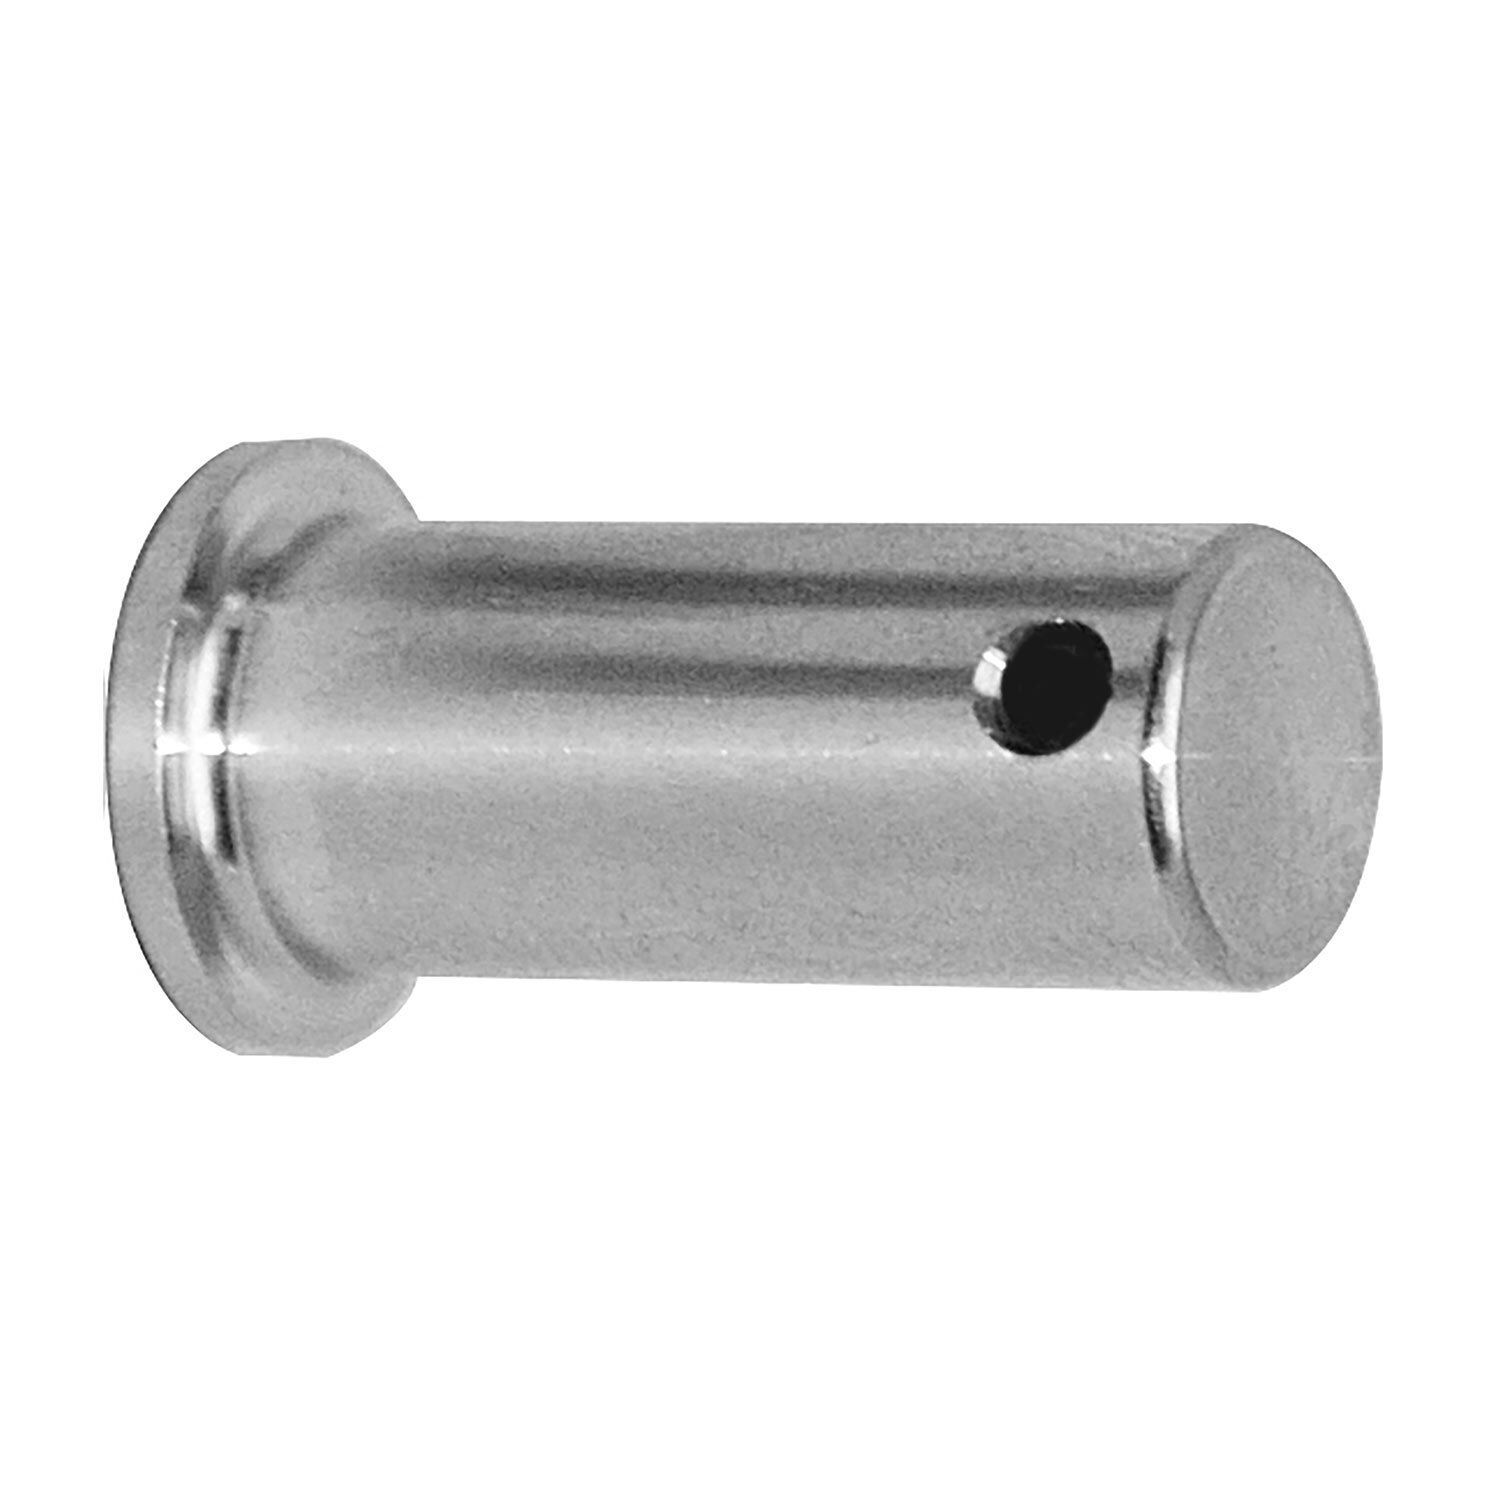 Pack of 5 3/8" x 1.1/4" Clevis Pins BZP 